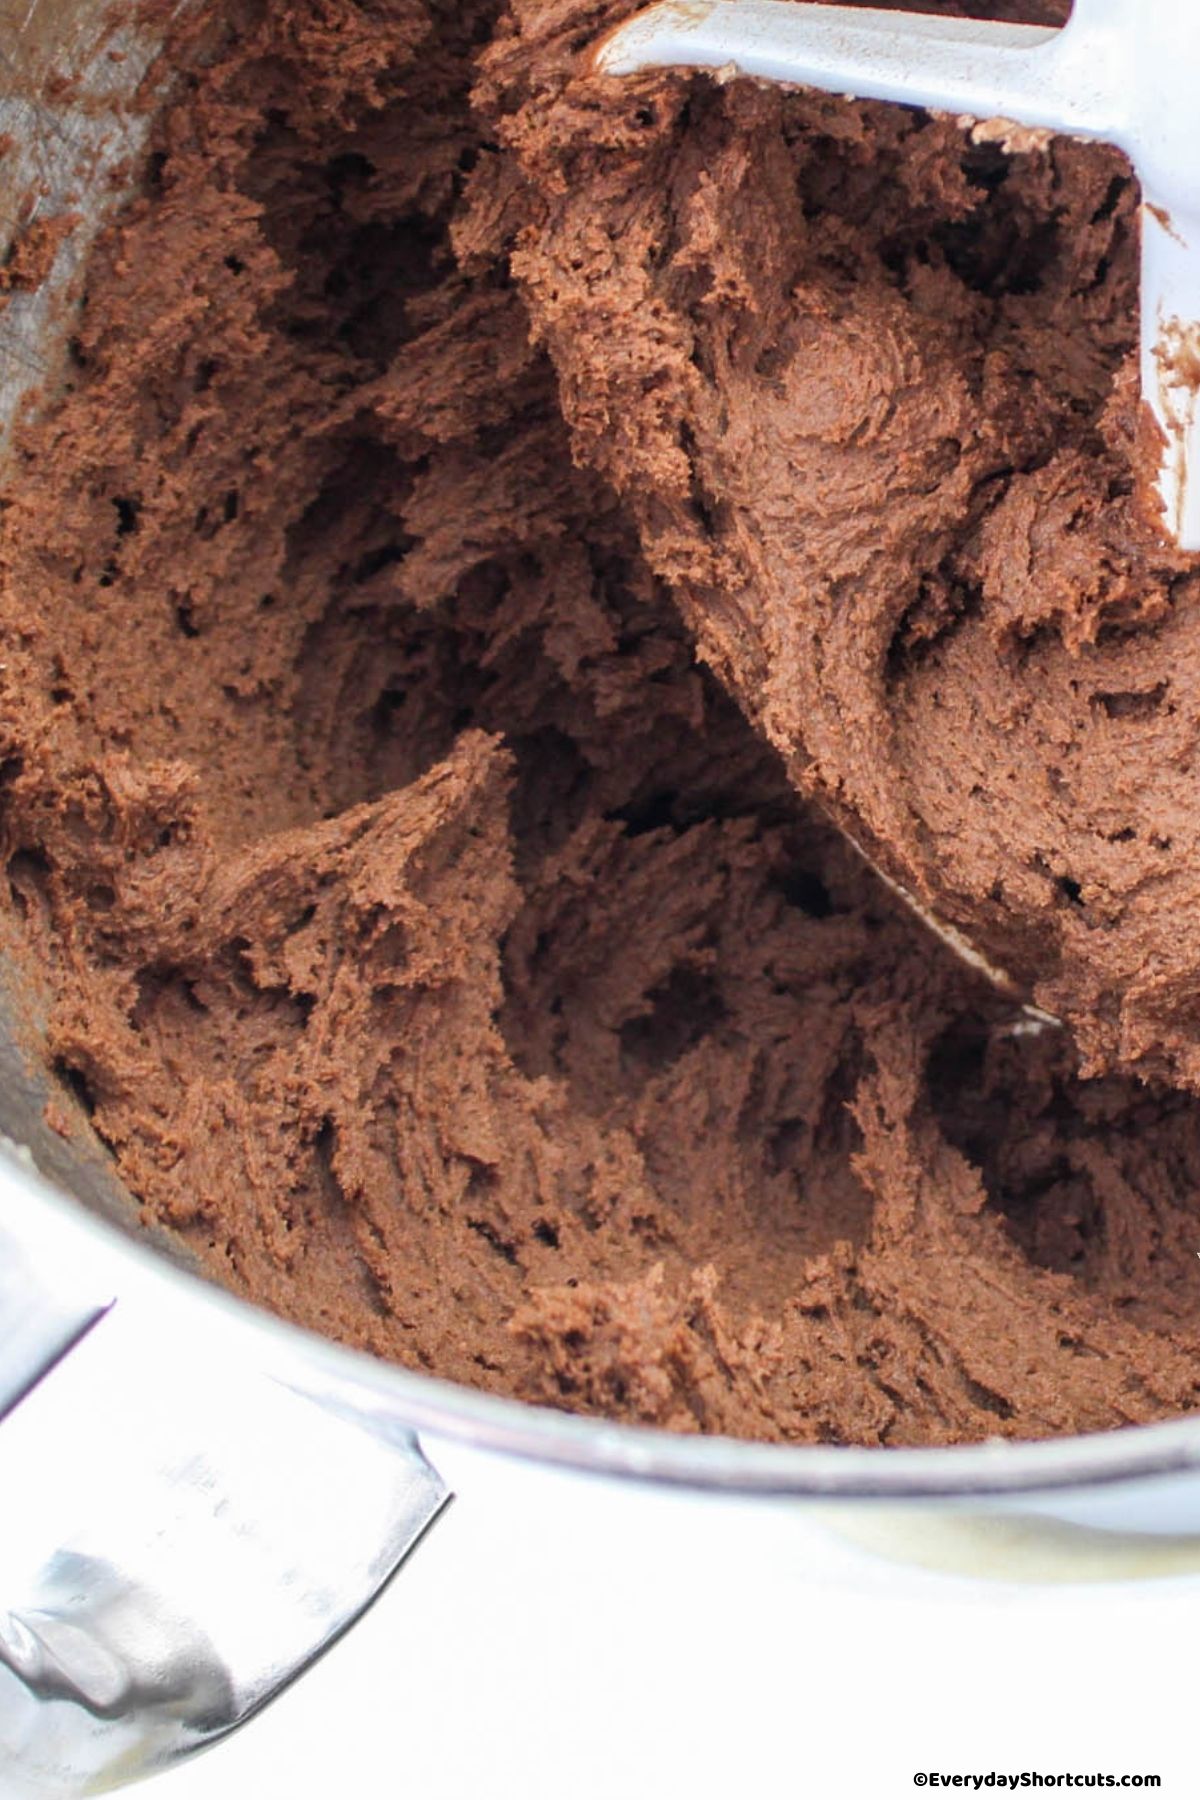 cocoa powder mixture mixed with butter mixture in a bowl